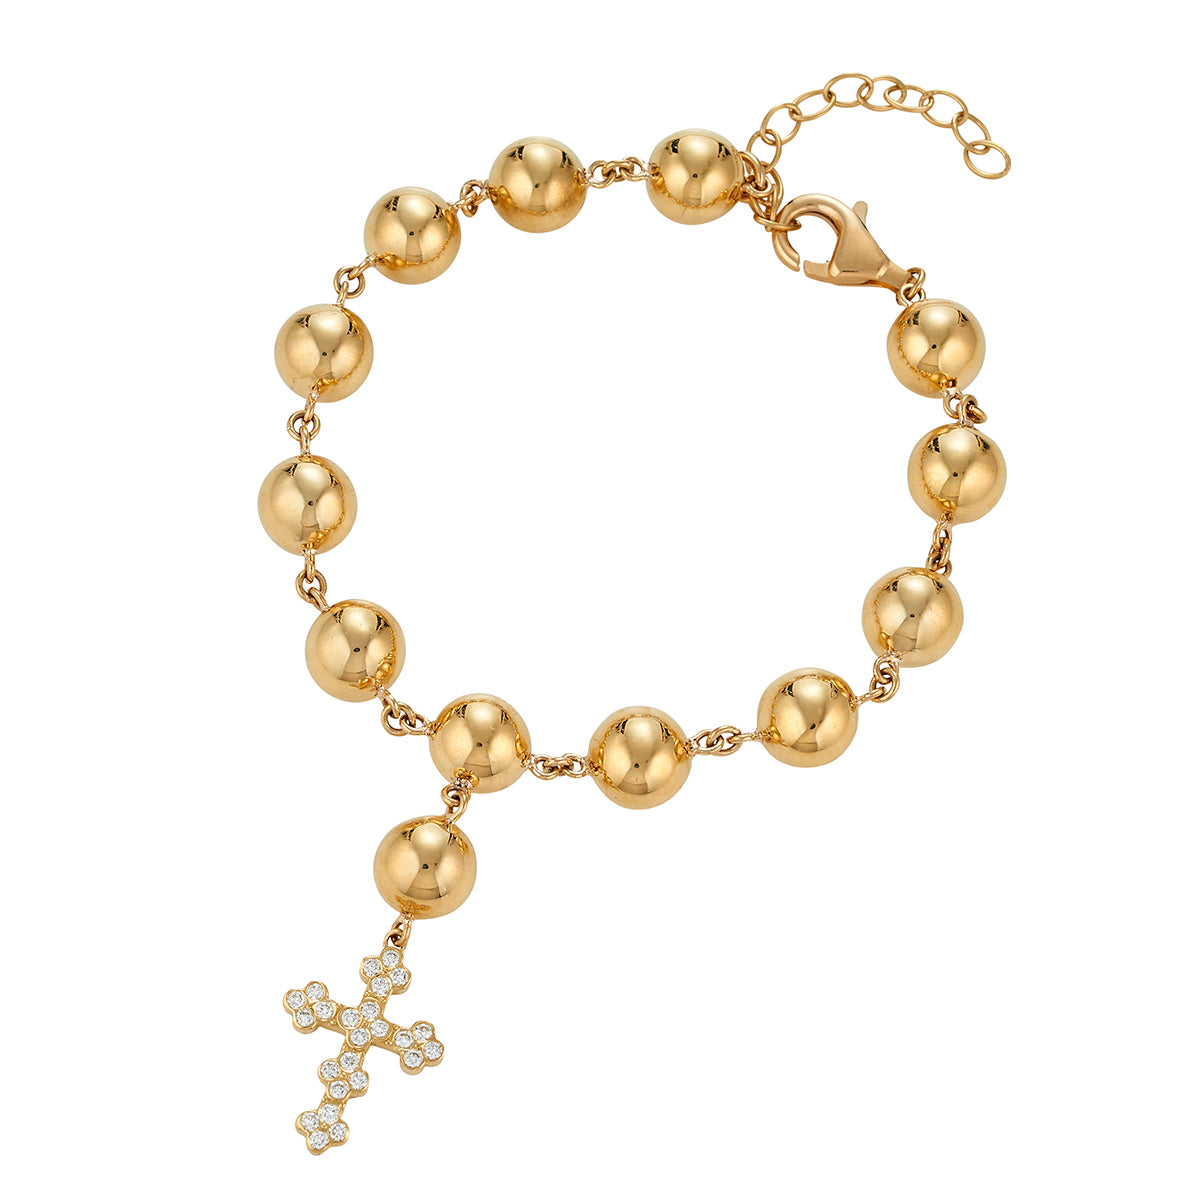 Buy Gold Rosary Bracelet Gold Anklet Ankle Black Rosary Bracelets Crucifix  Cross Jewelry Women High Quality Christian Catholic Gift for Her Online in  India - Etsy